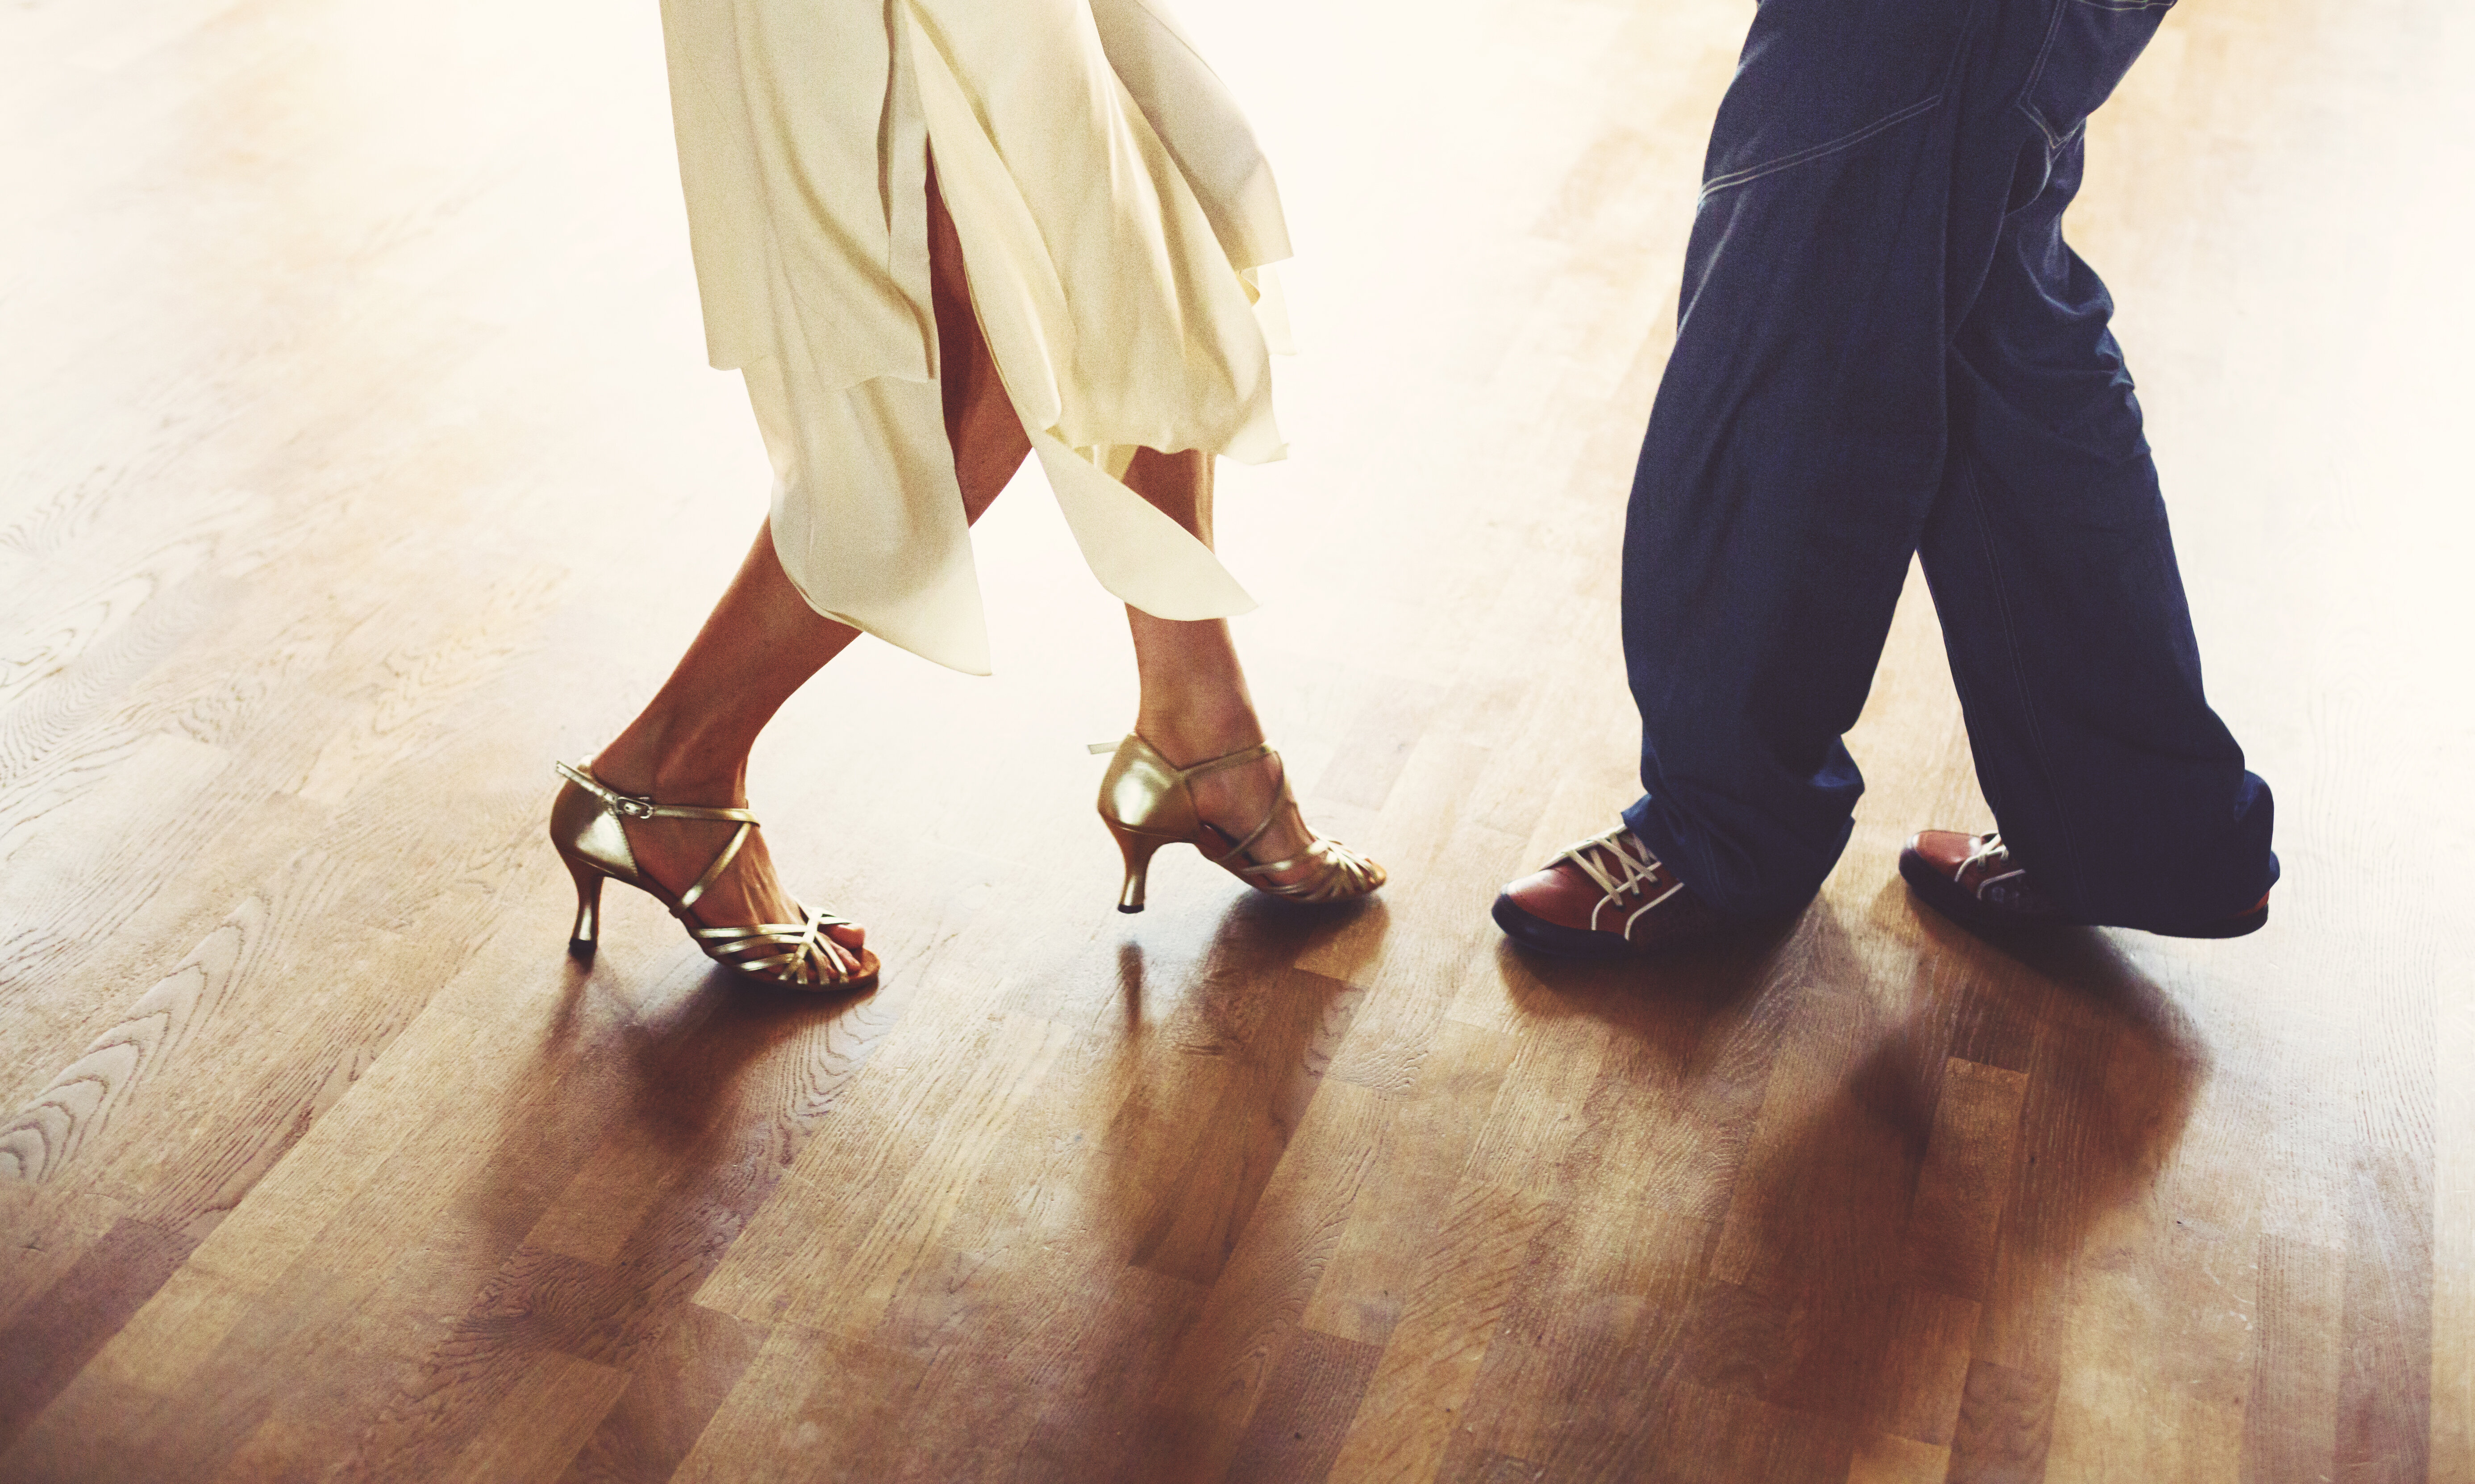 Heels Dance 101: A Beginner's Guide To This Fun And Flirty Dance - BetterMe